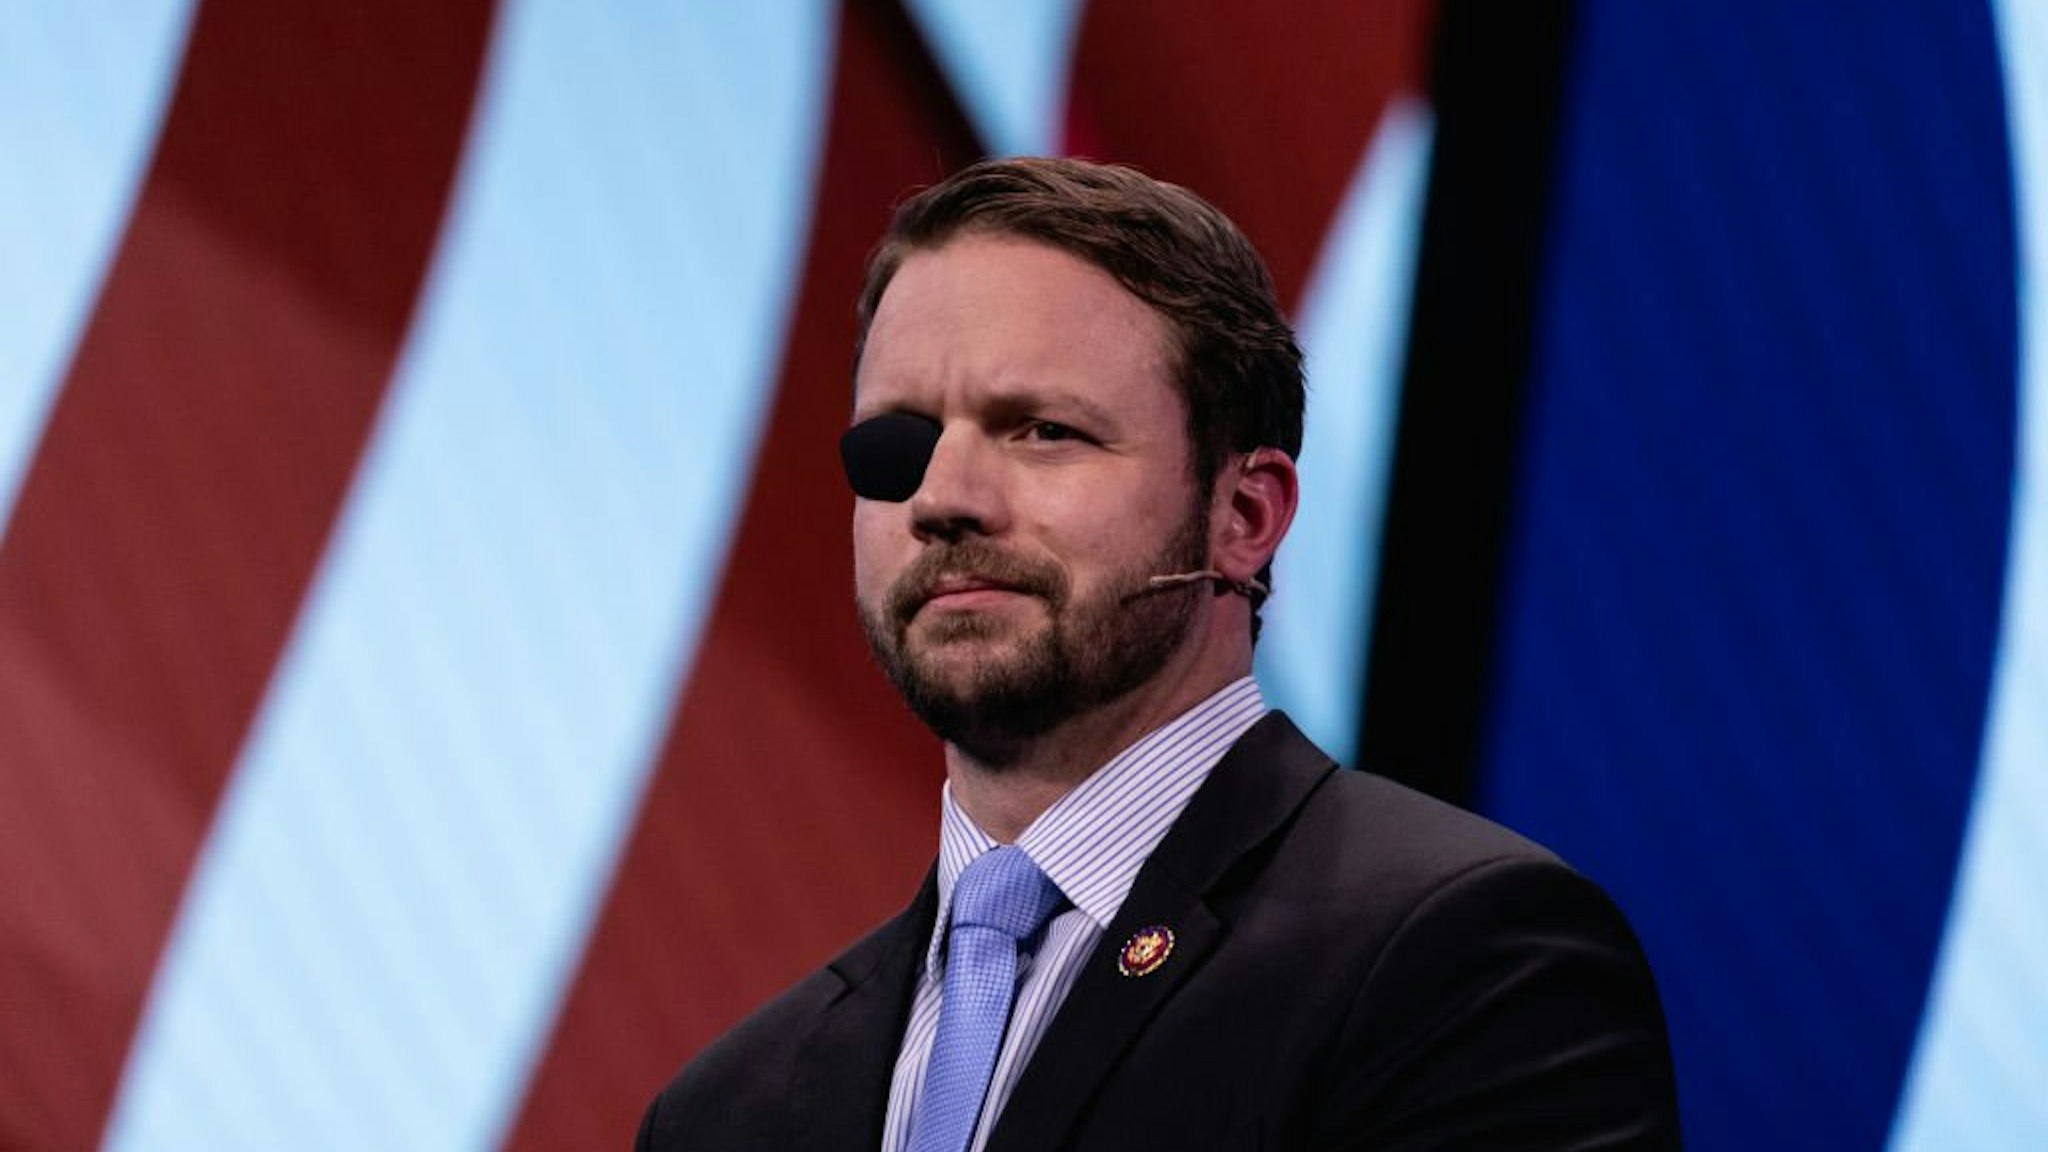 Dan Crenshaw speaks at the 2019 American Israel Public Affairs Committee (AIPAC) Policy Conference.